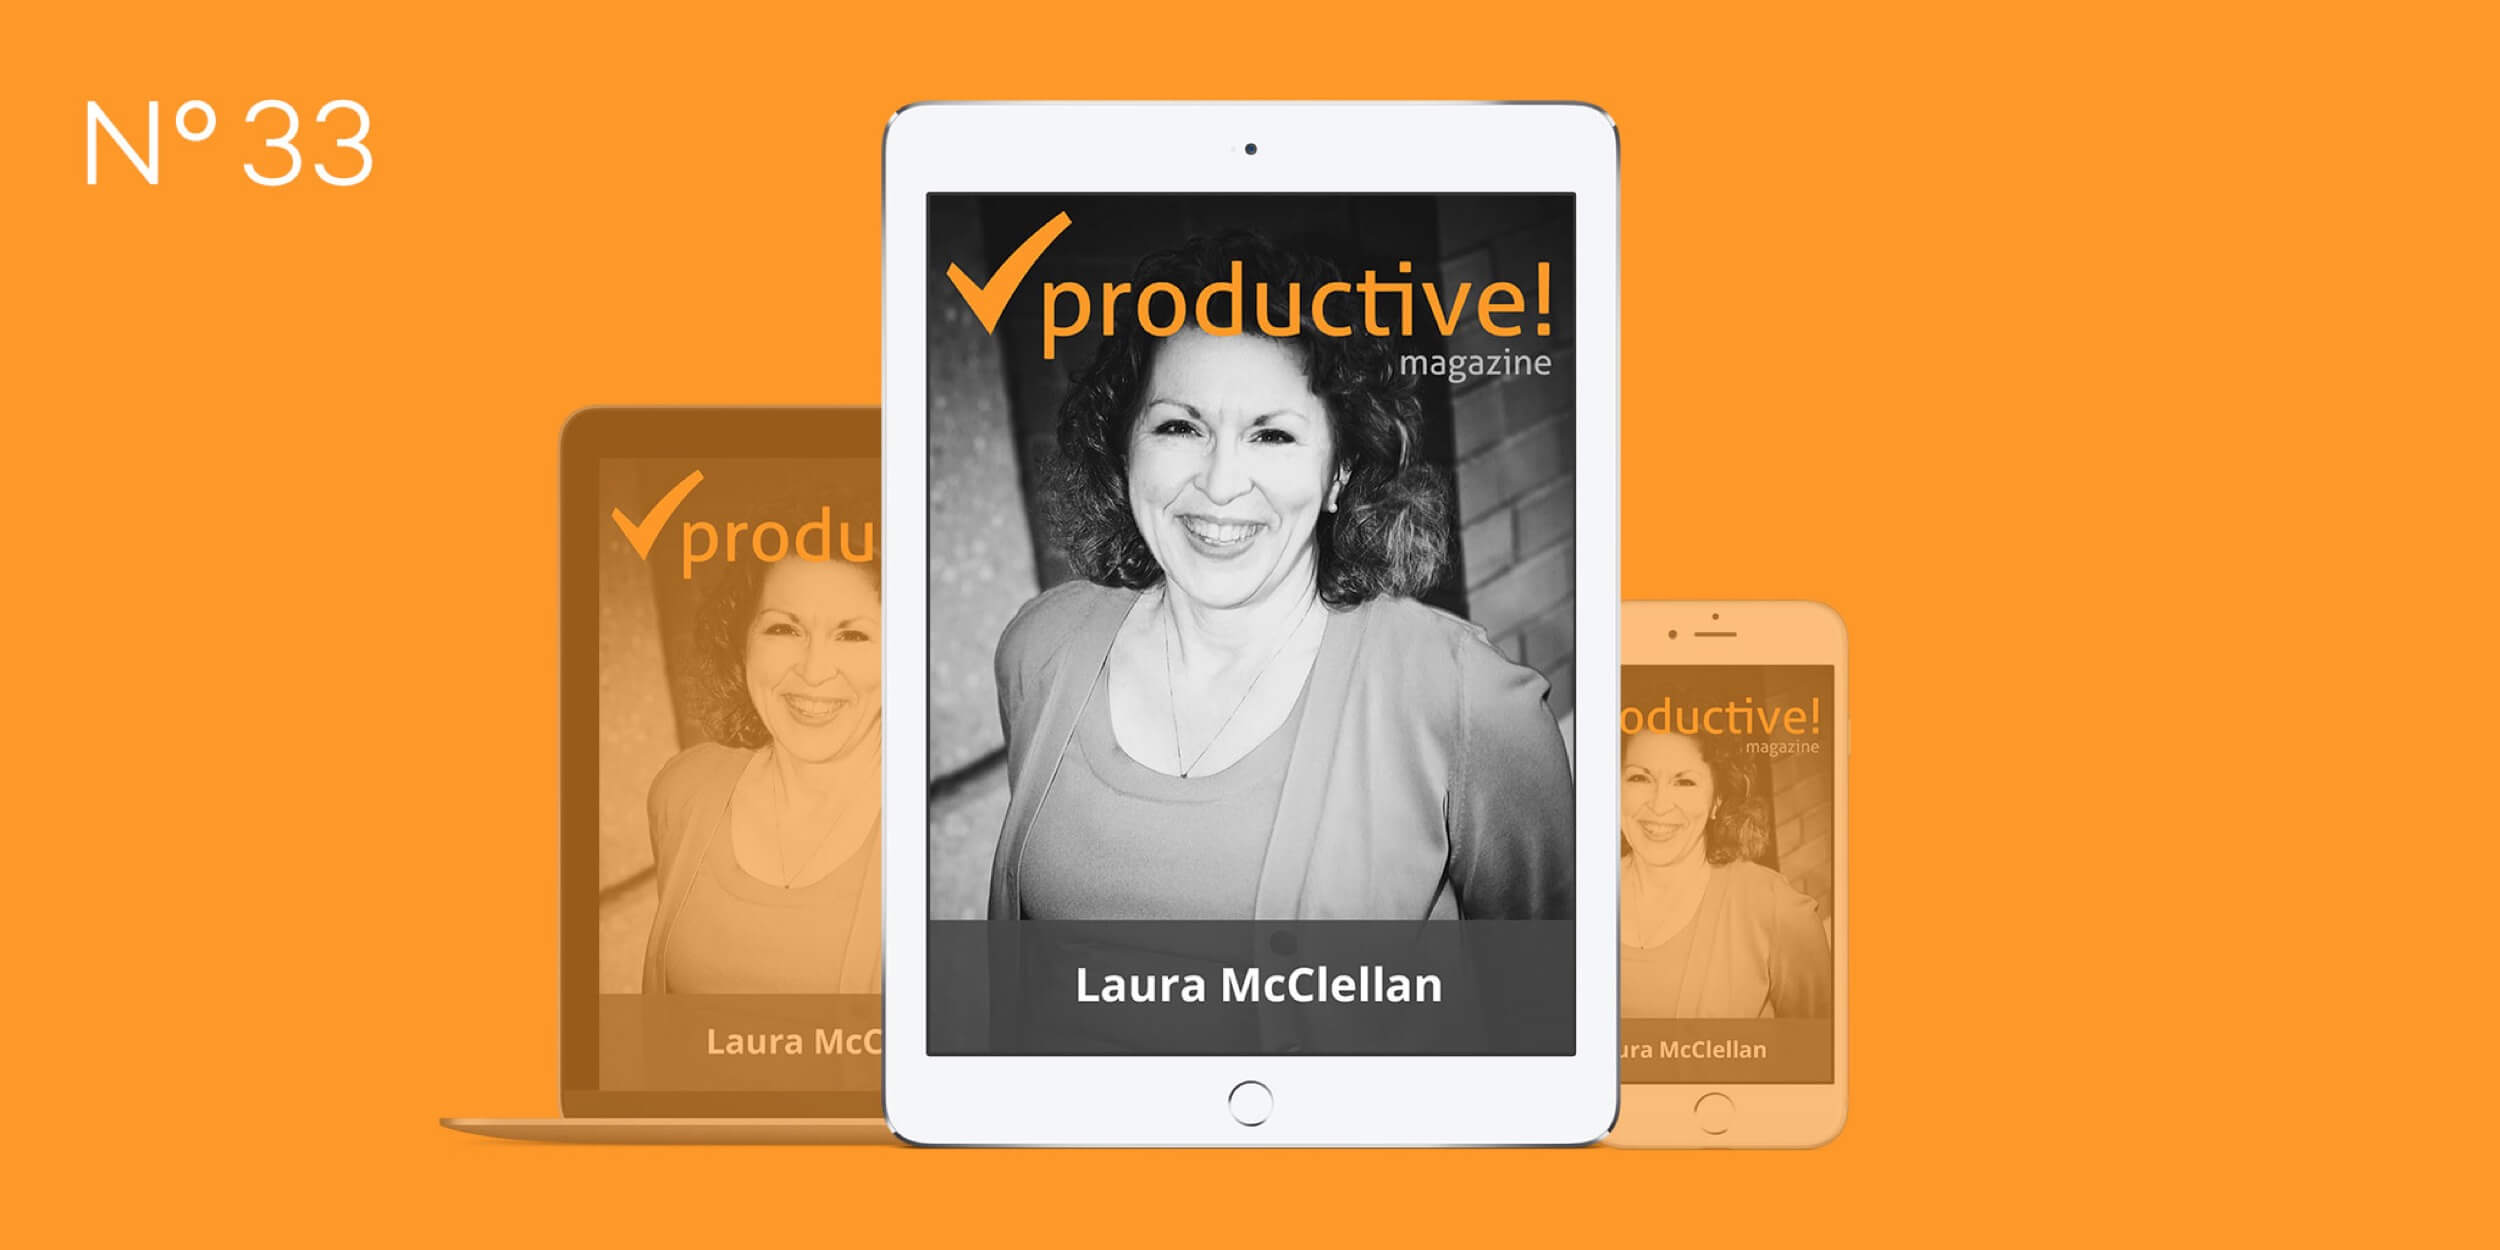 Why you should have a morning routine - intro to Productive! Magazine #33 with Laura McClellan